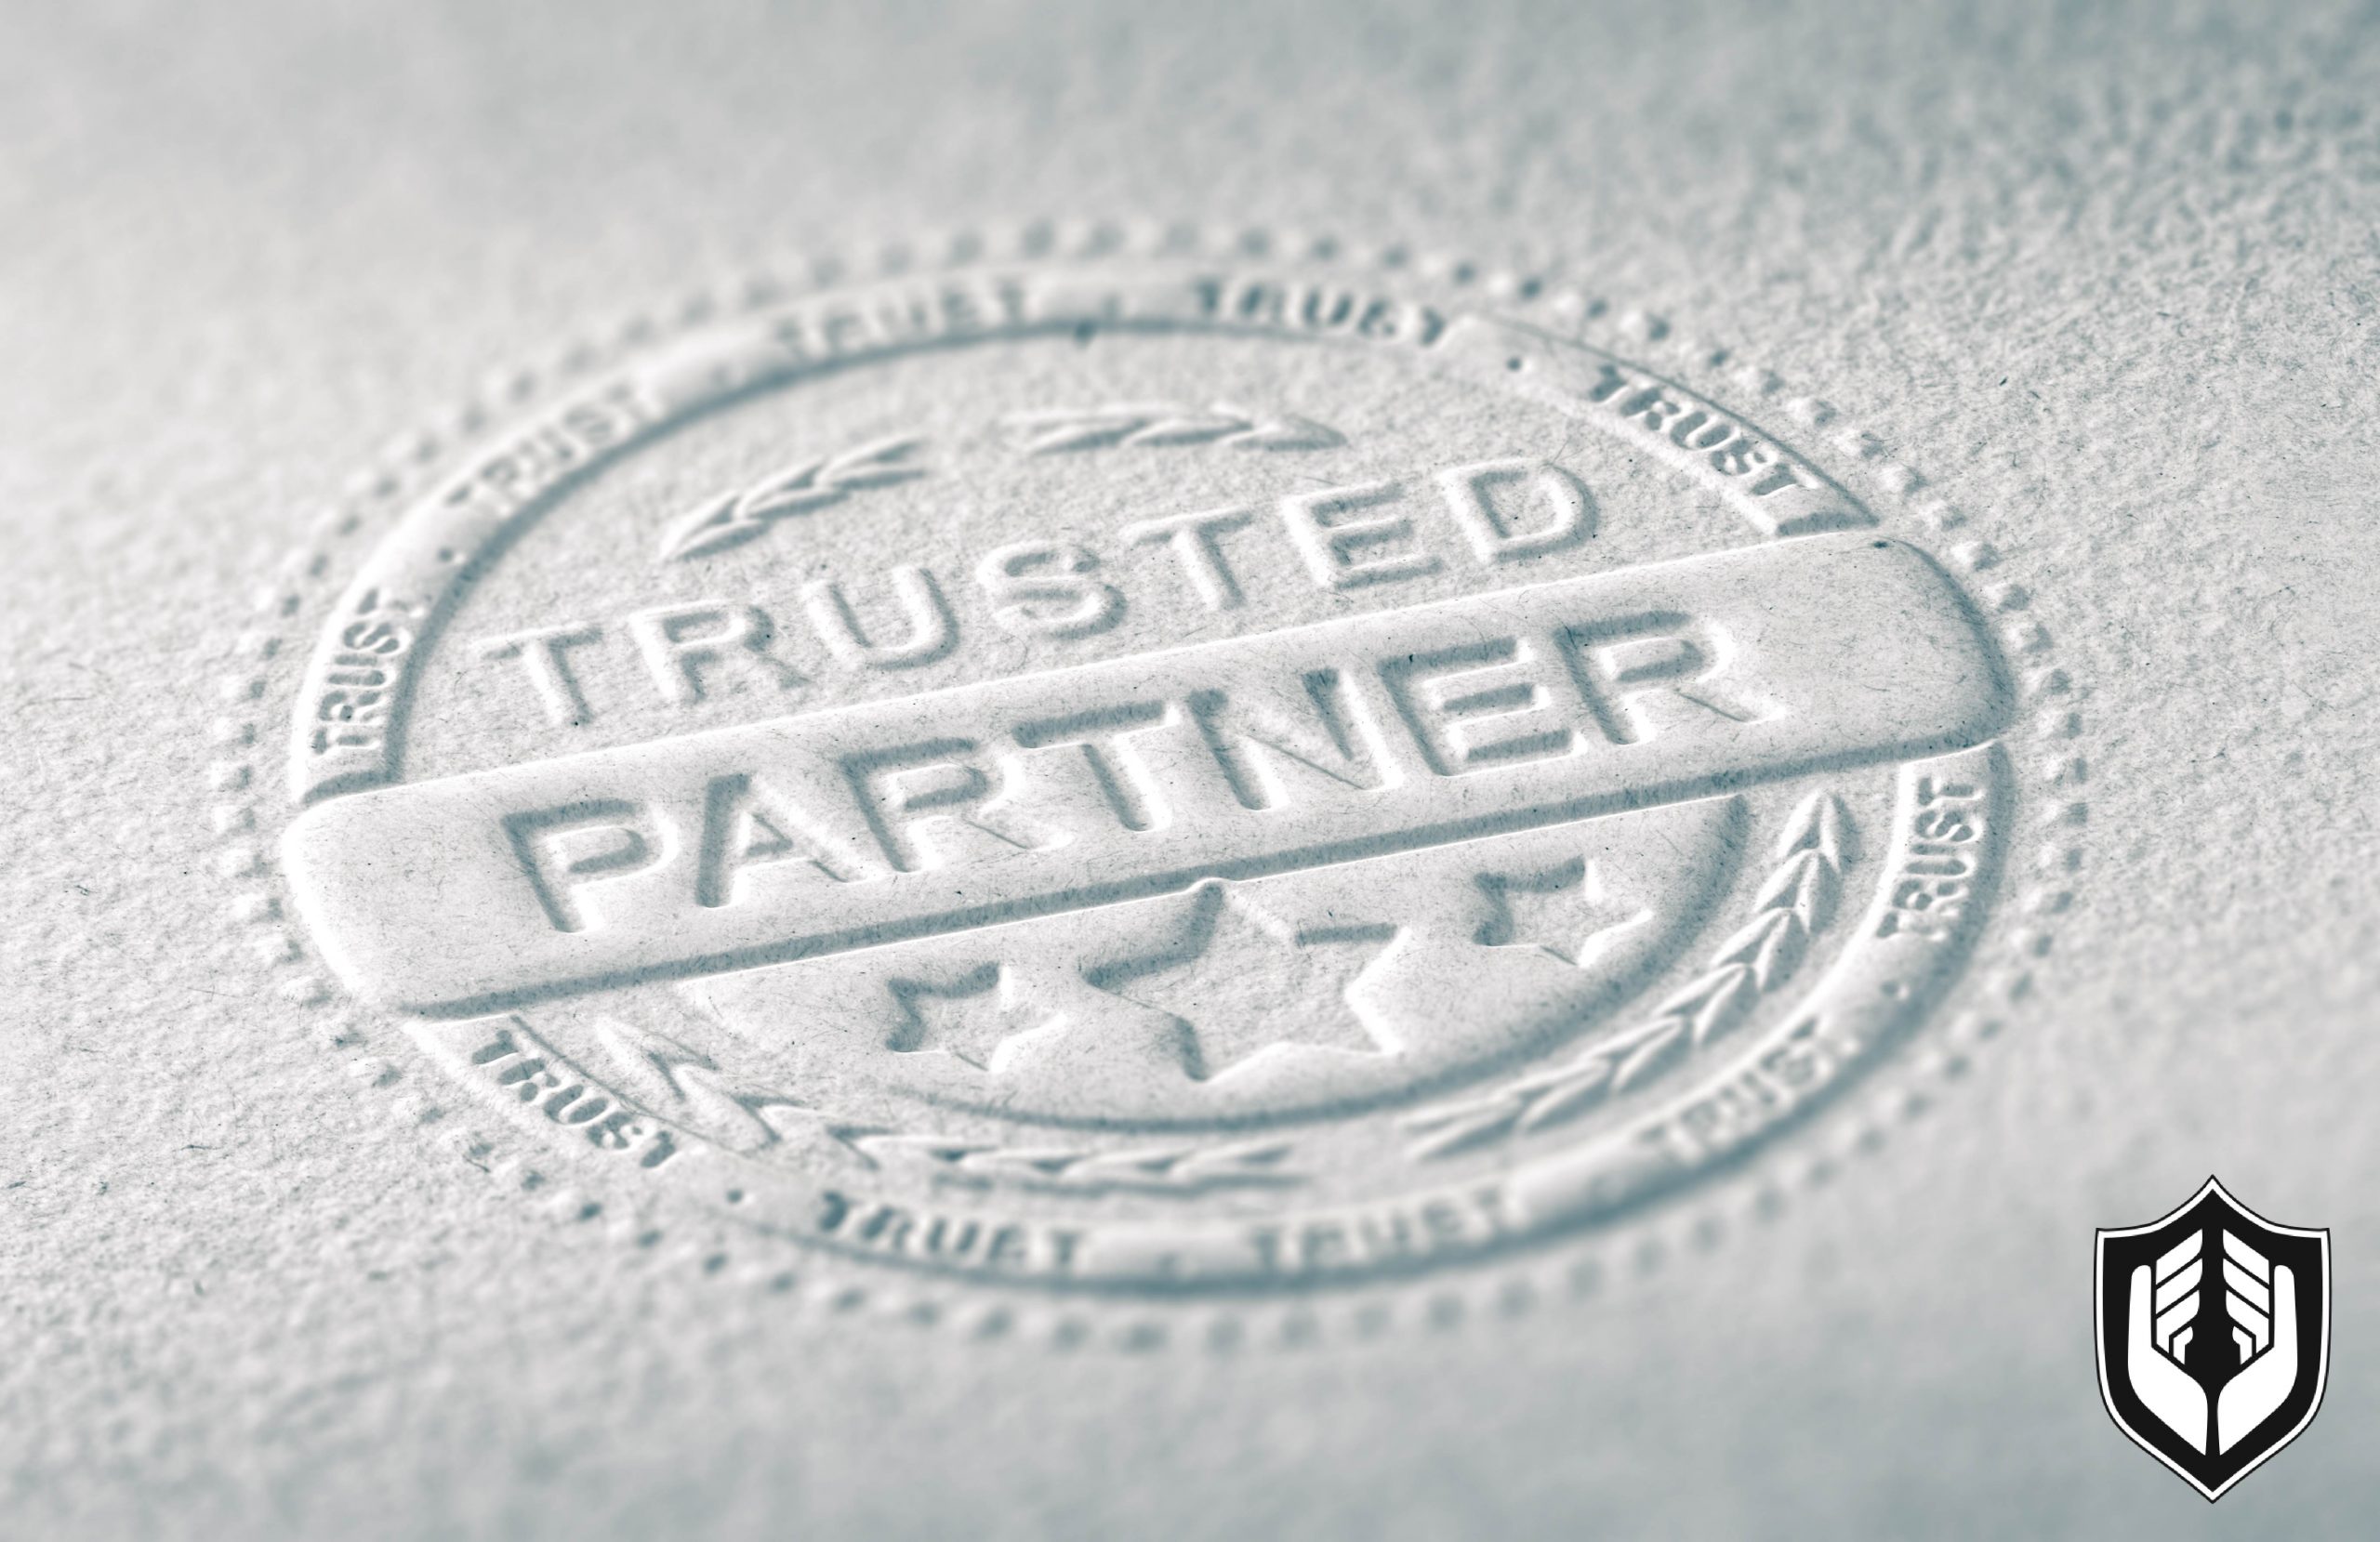 trusted partner seal of confidence in ethics